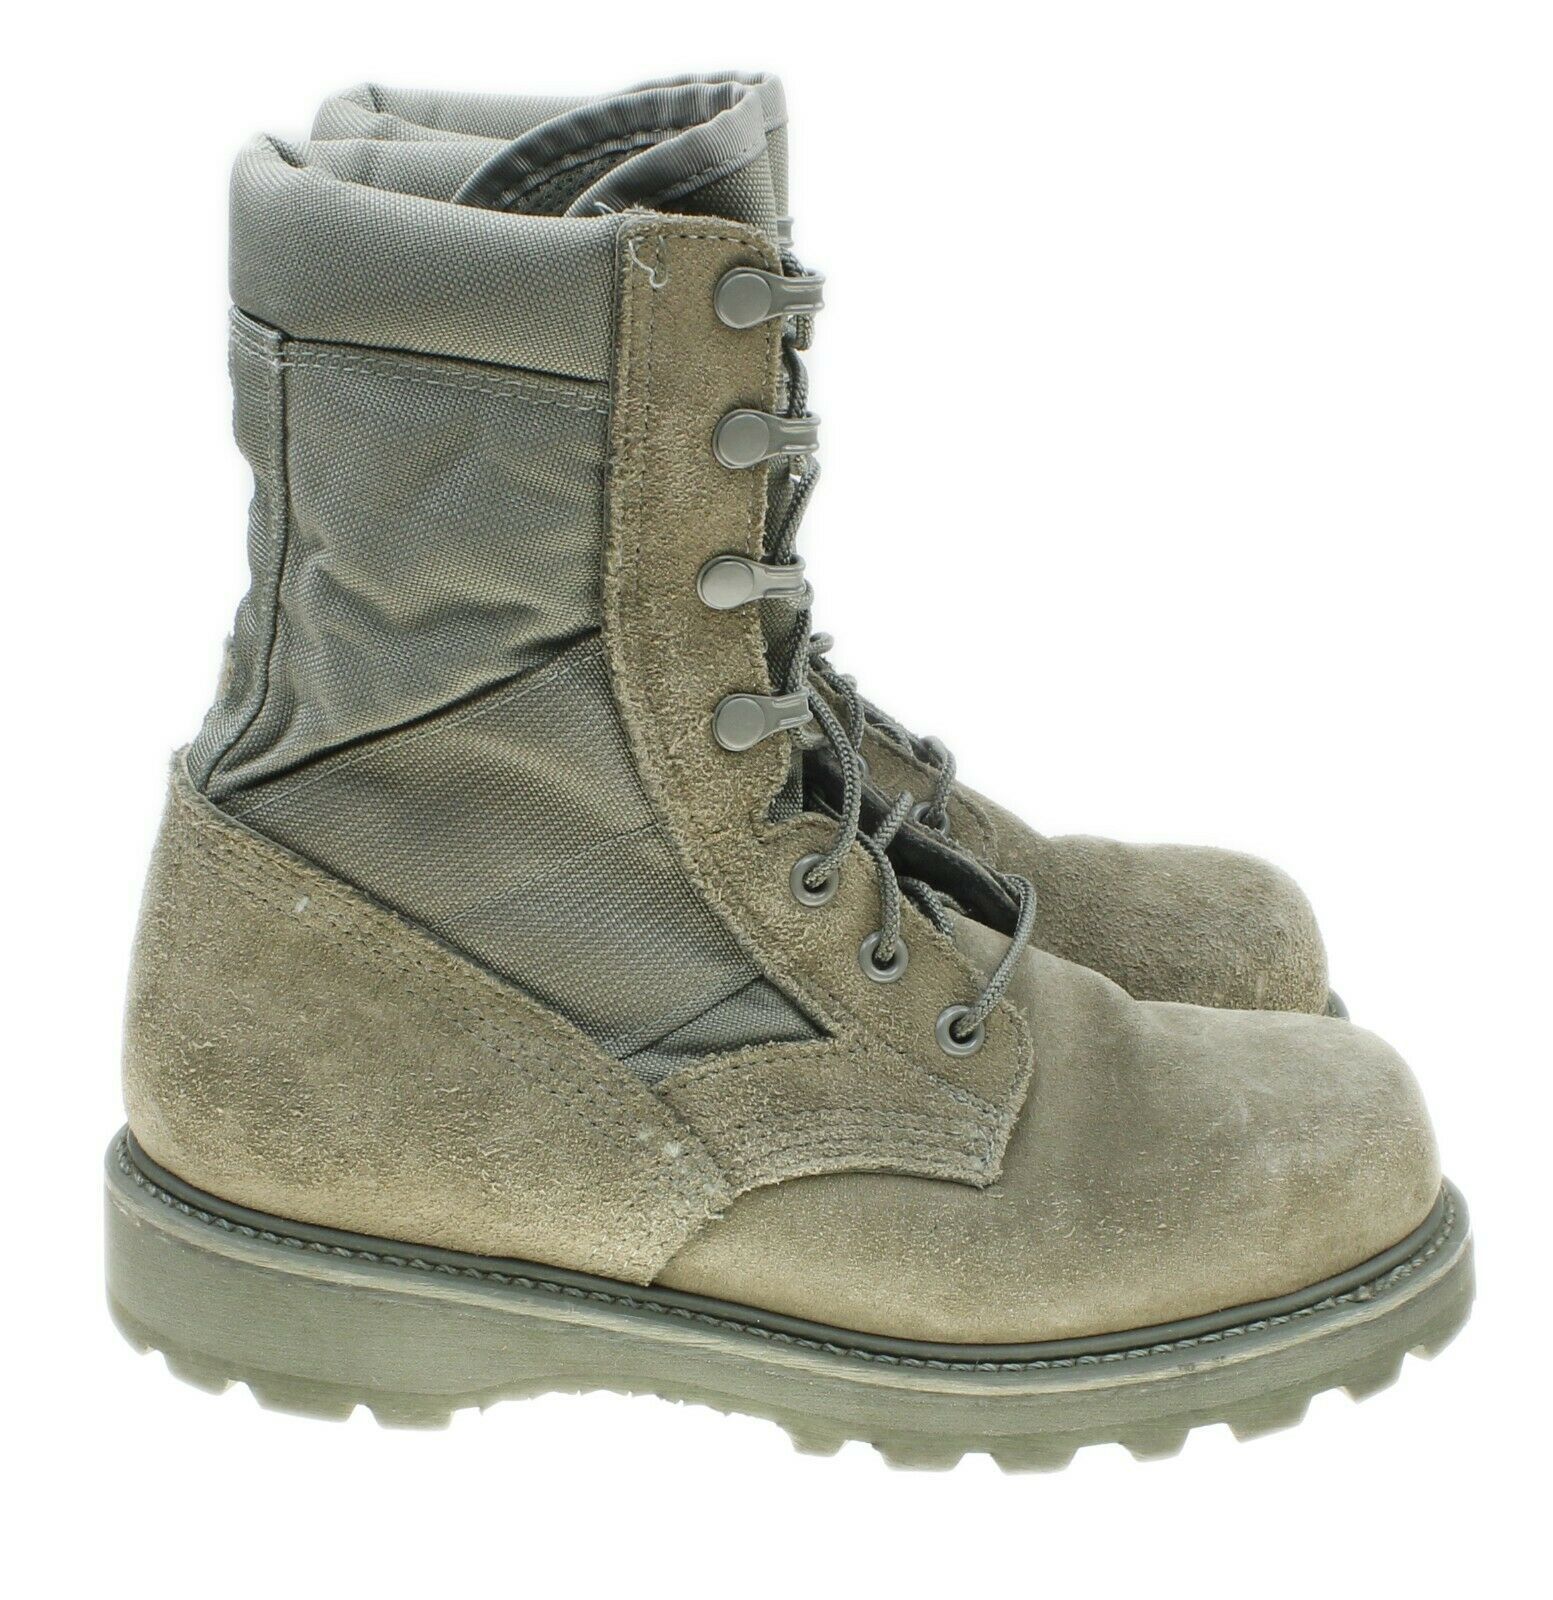 Vibram Army Boots - Army Military